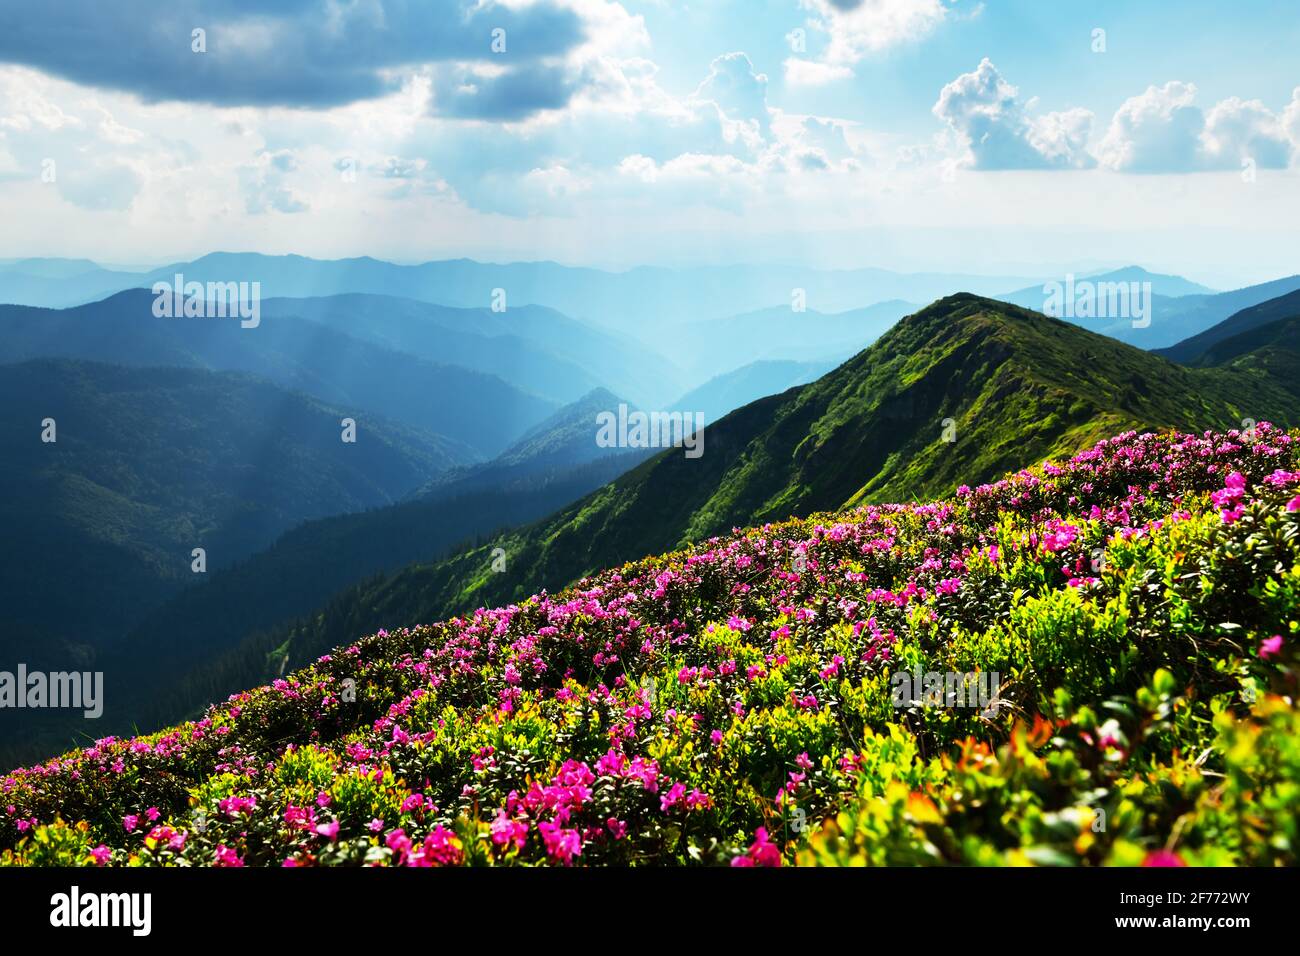 Rhododendron flowers covered mountains meadow in summer time. Orange sunrise light glowing on a foreground. Landscape photography Stock Photo